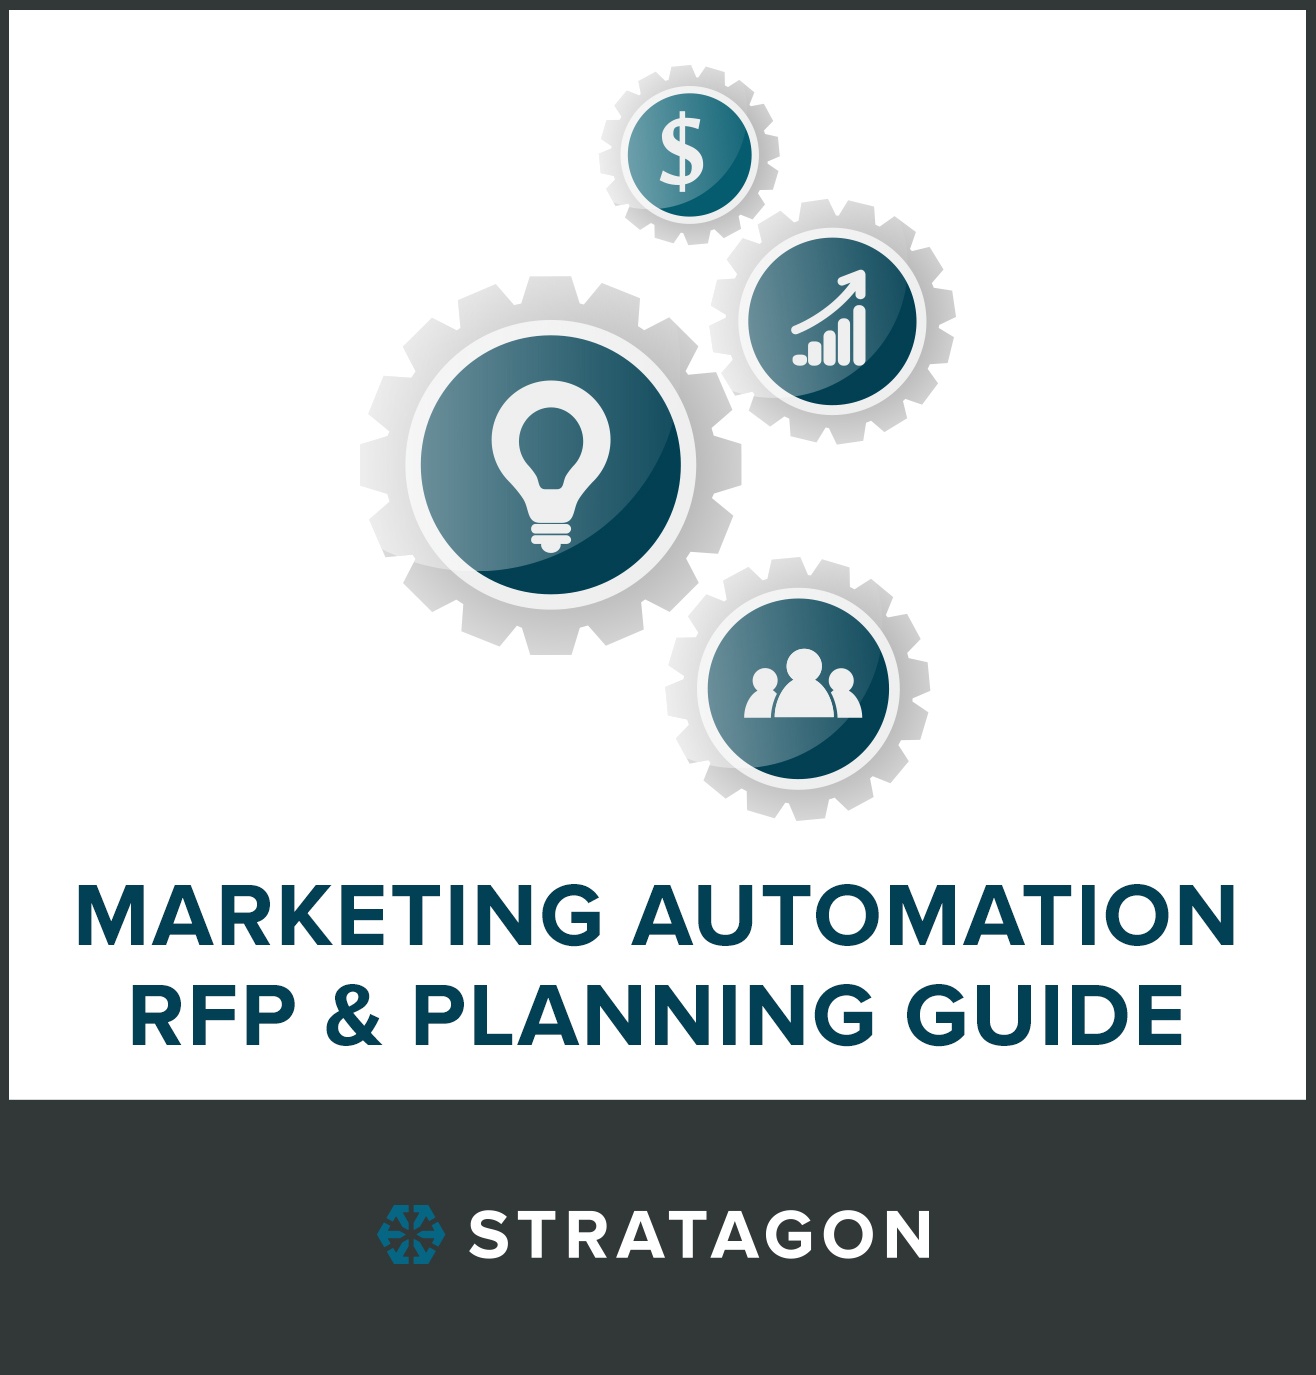 Marketing Automation RFP & Planning Guide